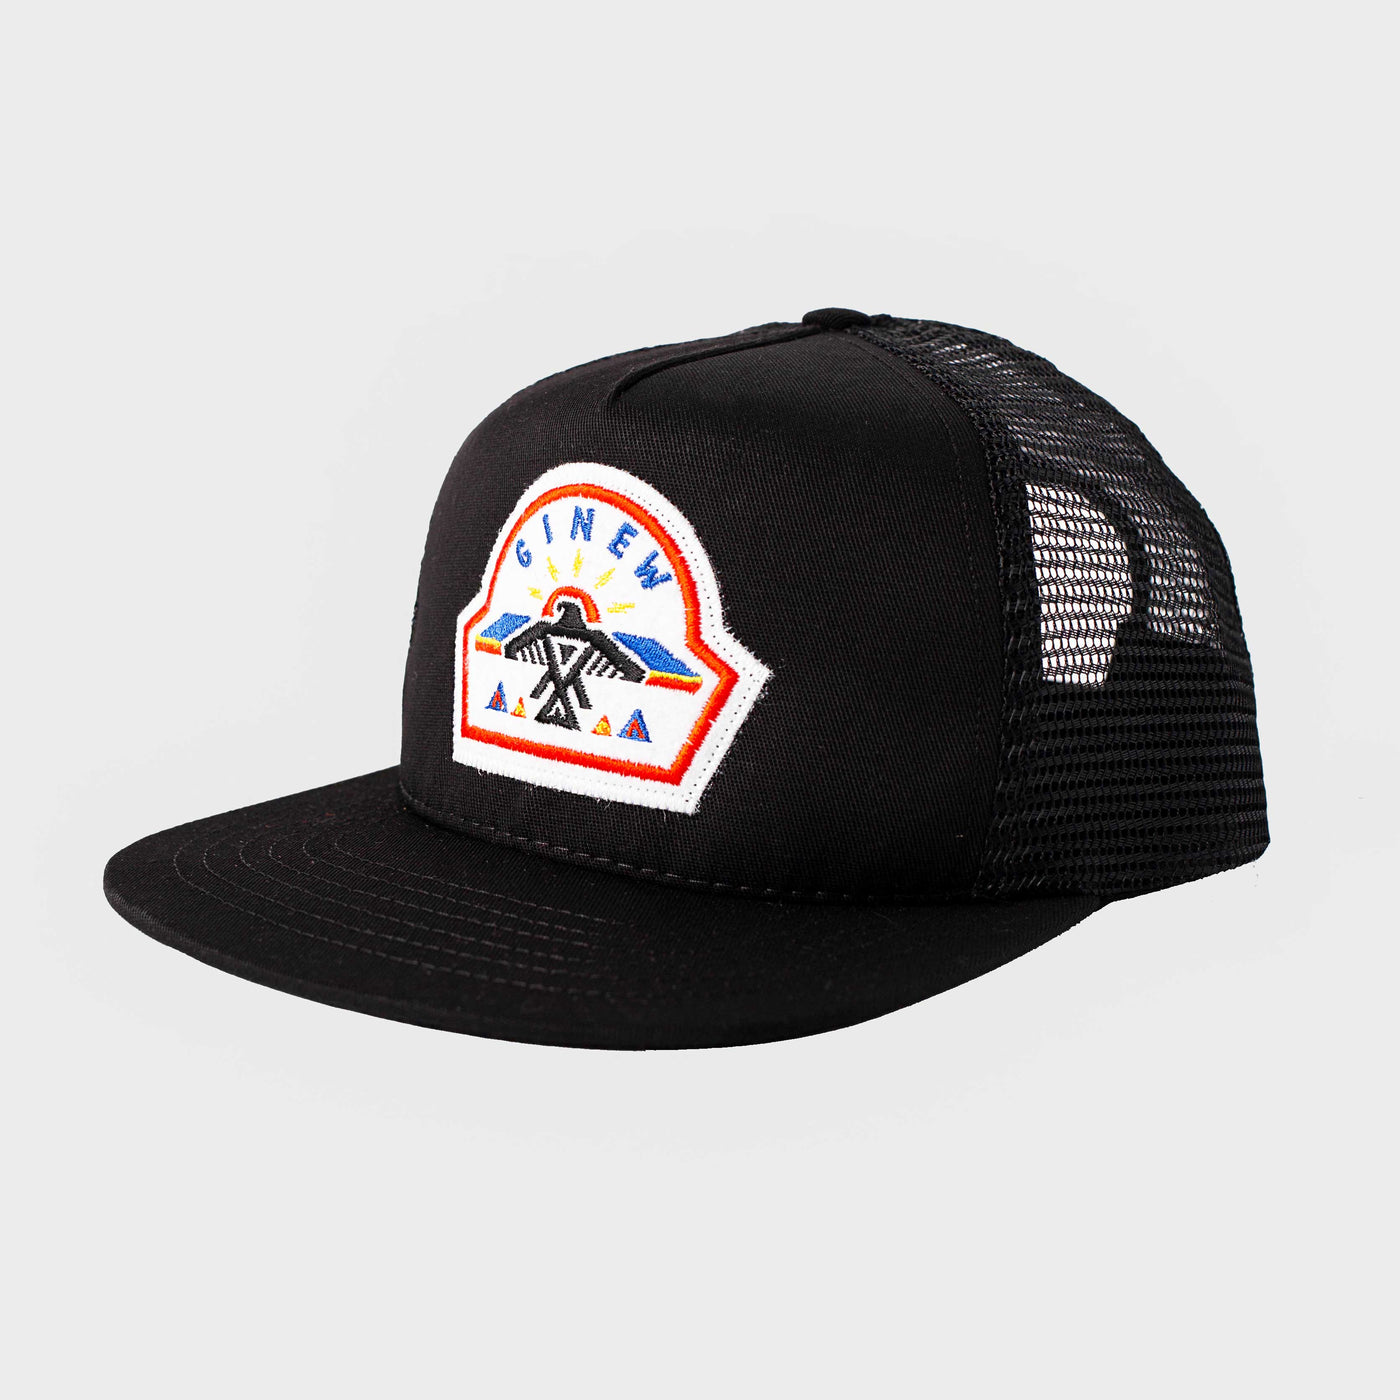 A black Trucker Hat with a white Ginew patch sewn at center front is shown on a white background. The patch features a thunderbird design stitched from blue, black, red, yellow, and orange thread.